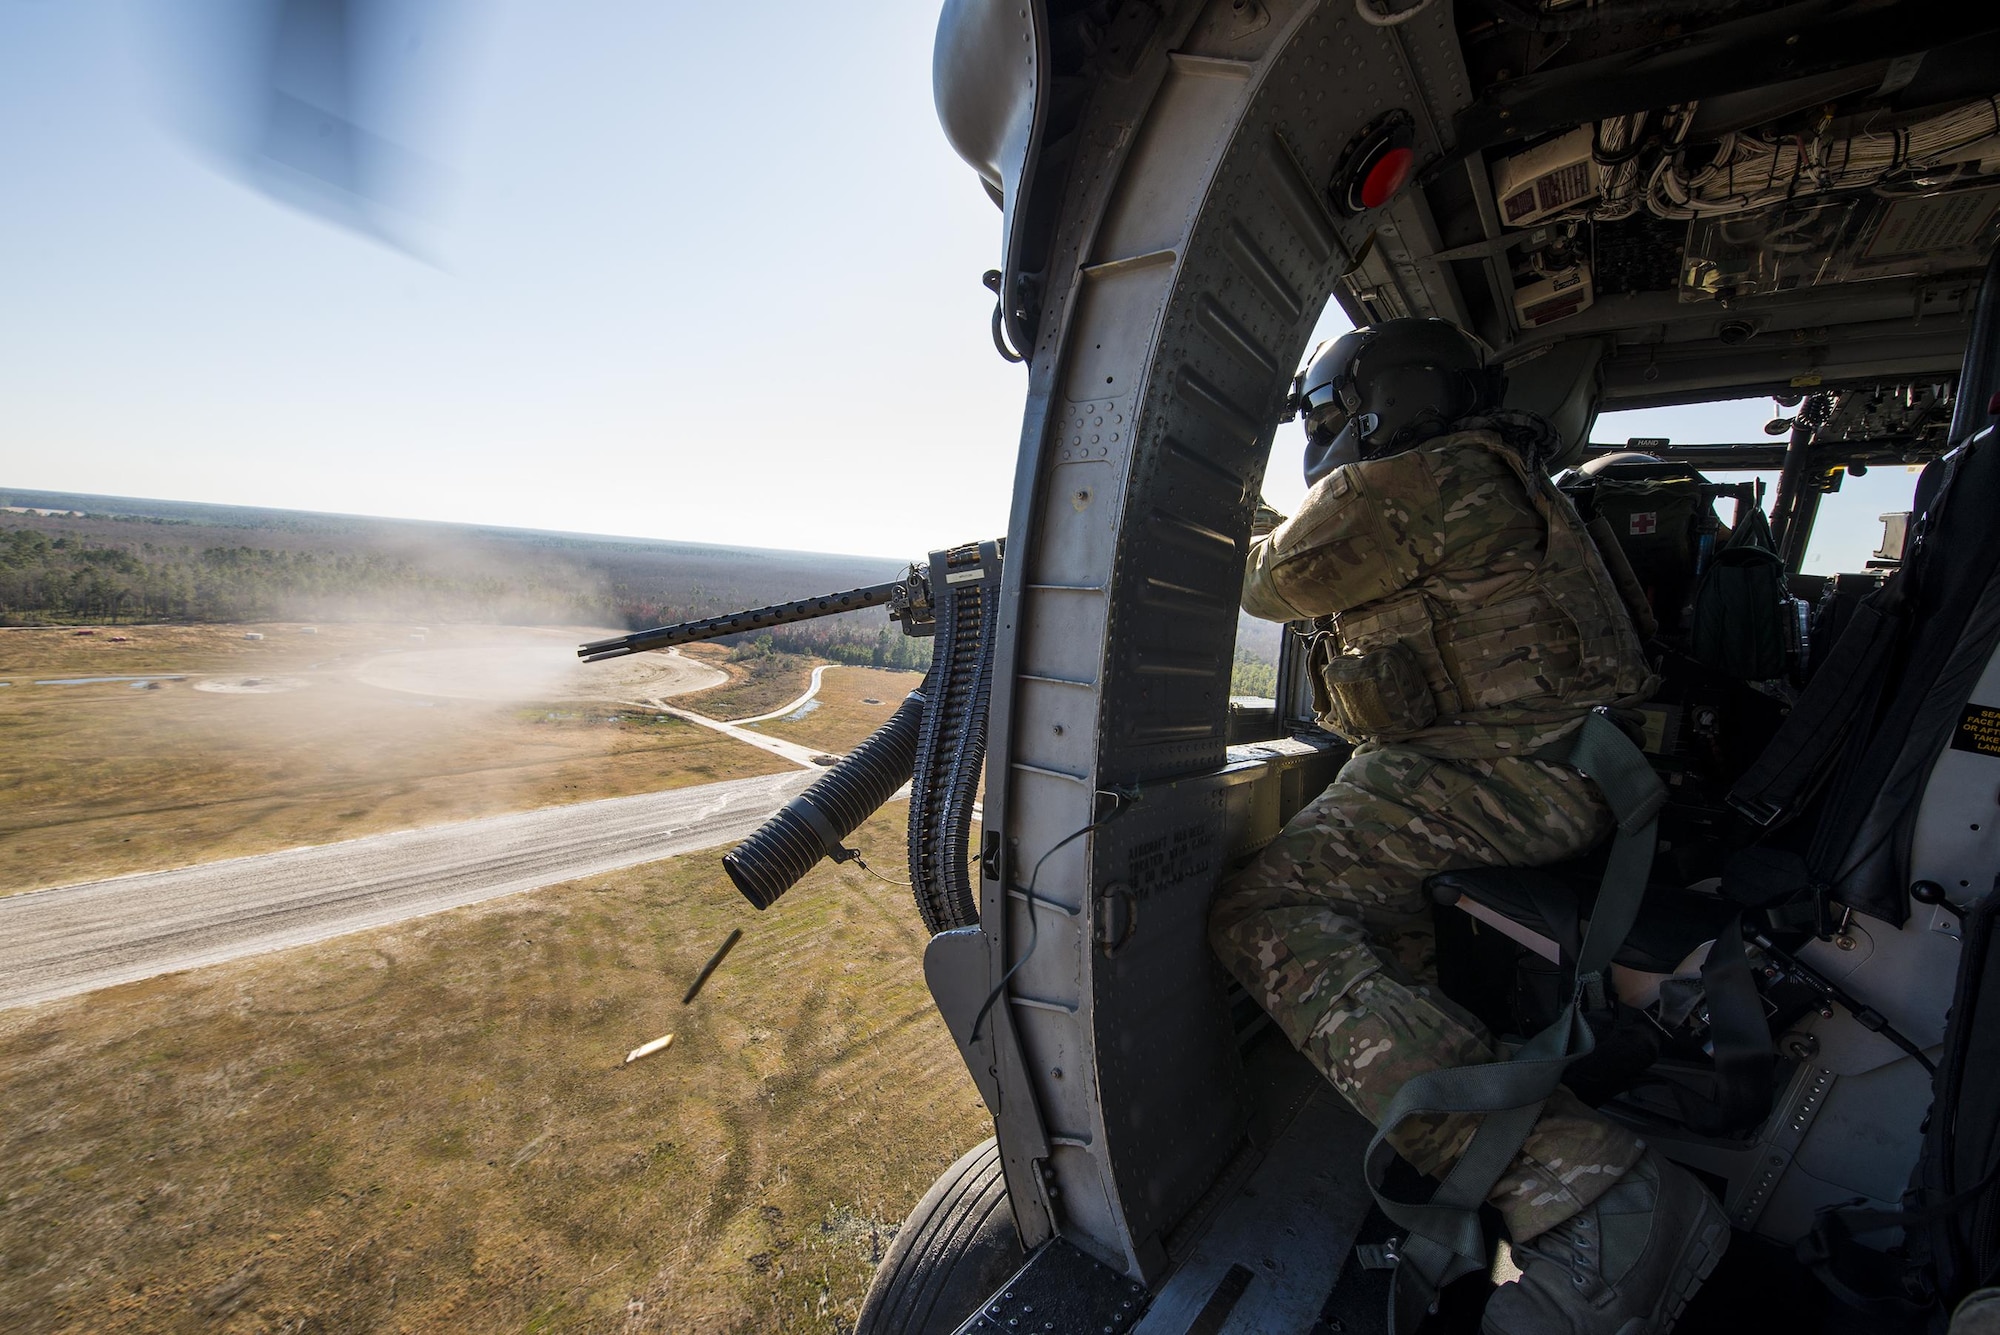 Tech. Sgt. Uwemediimo Essien fires a .50-caliber machine gun at simulated enemy targets while flying over Grand Bay Bombing and Gunnery Range Feb. 19, 2015, at Moody Air Force Base, Ga. The side-mounted, .50-caliber machine gun is the HH-60G Pave Hawk’s primary form of defense. Essien is a 41st Rescue Squadron aerial gunner. (U.S. Air Force photo/Senior Airman Ryan Callaghan)